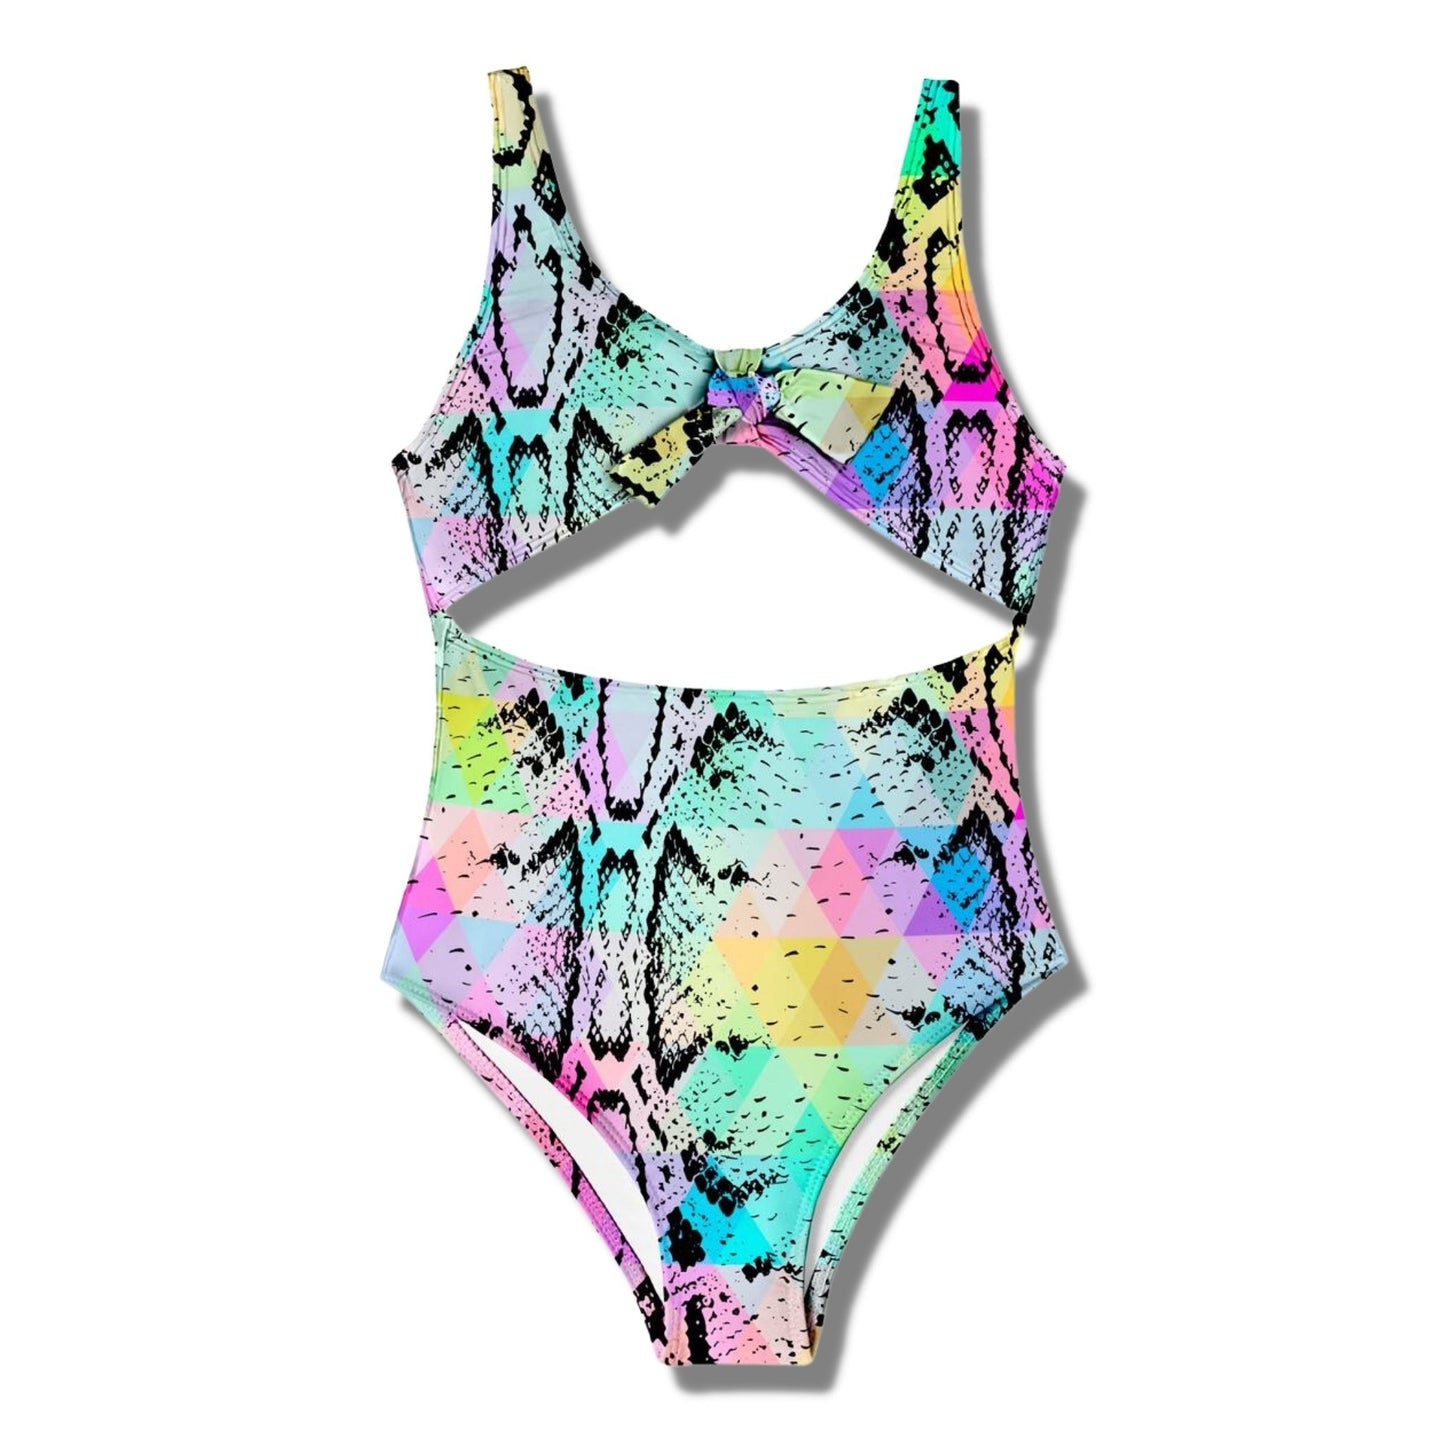 Stella Cove Pastel Snake Open Chest Tie Swimsuit - a Spirit Animal - Bathing Suit $60-$75 Bathing Suit One-Piece